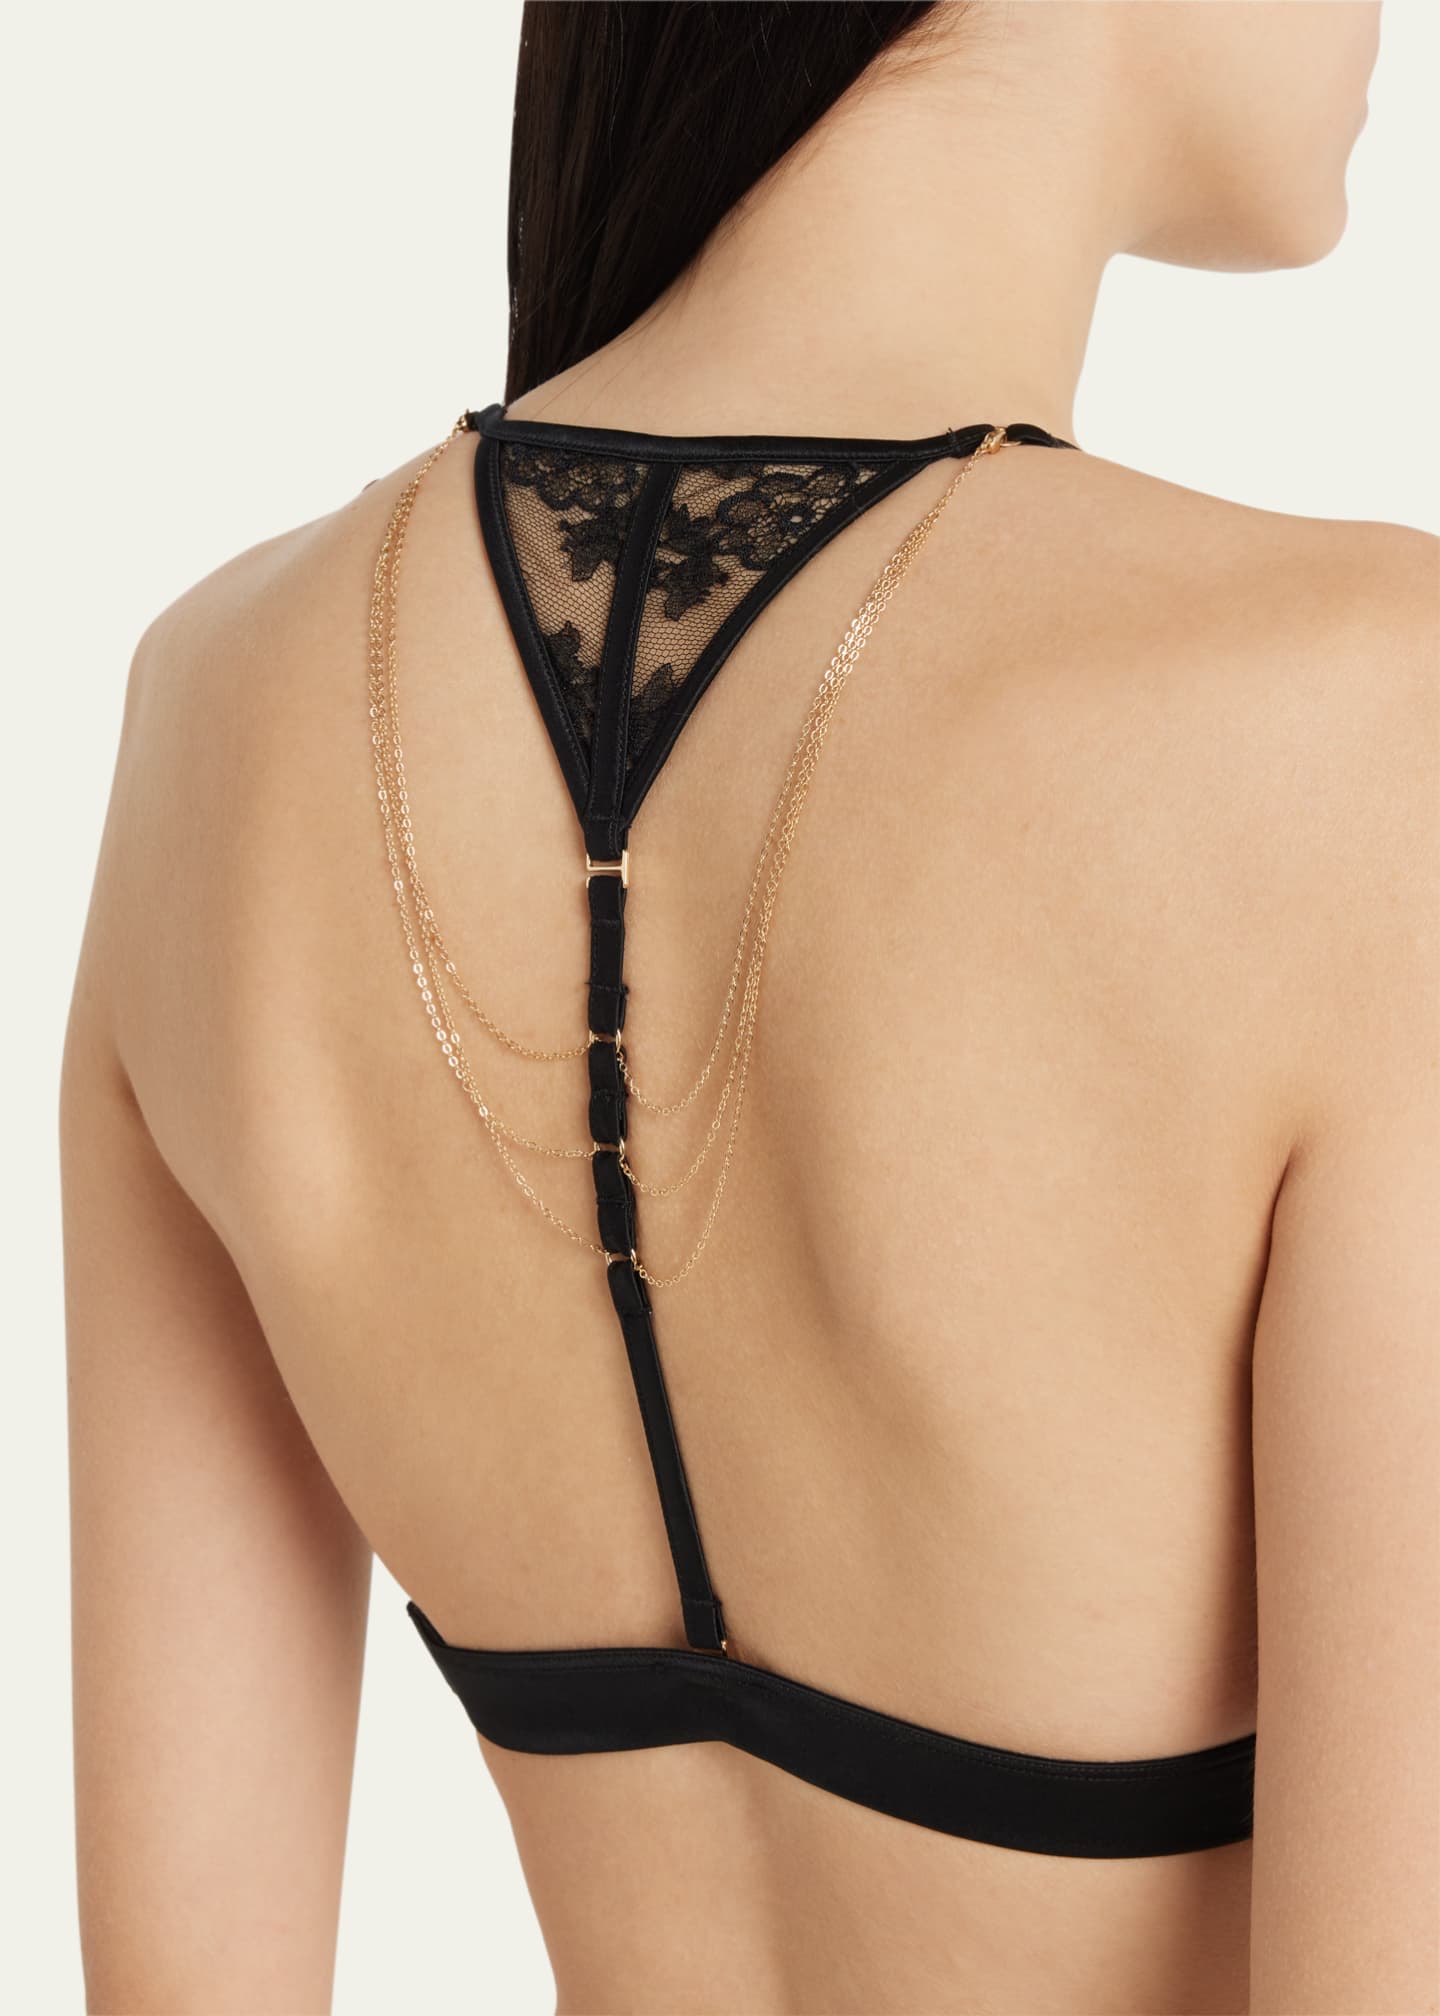 Livy Lilas Chain-Embellished Lace & Silk Bralette - Bergdorf Goodman